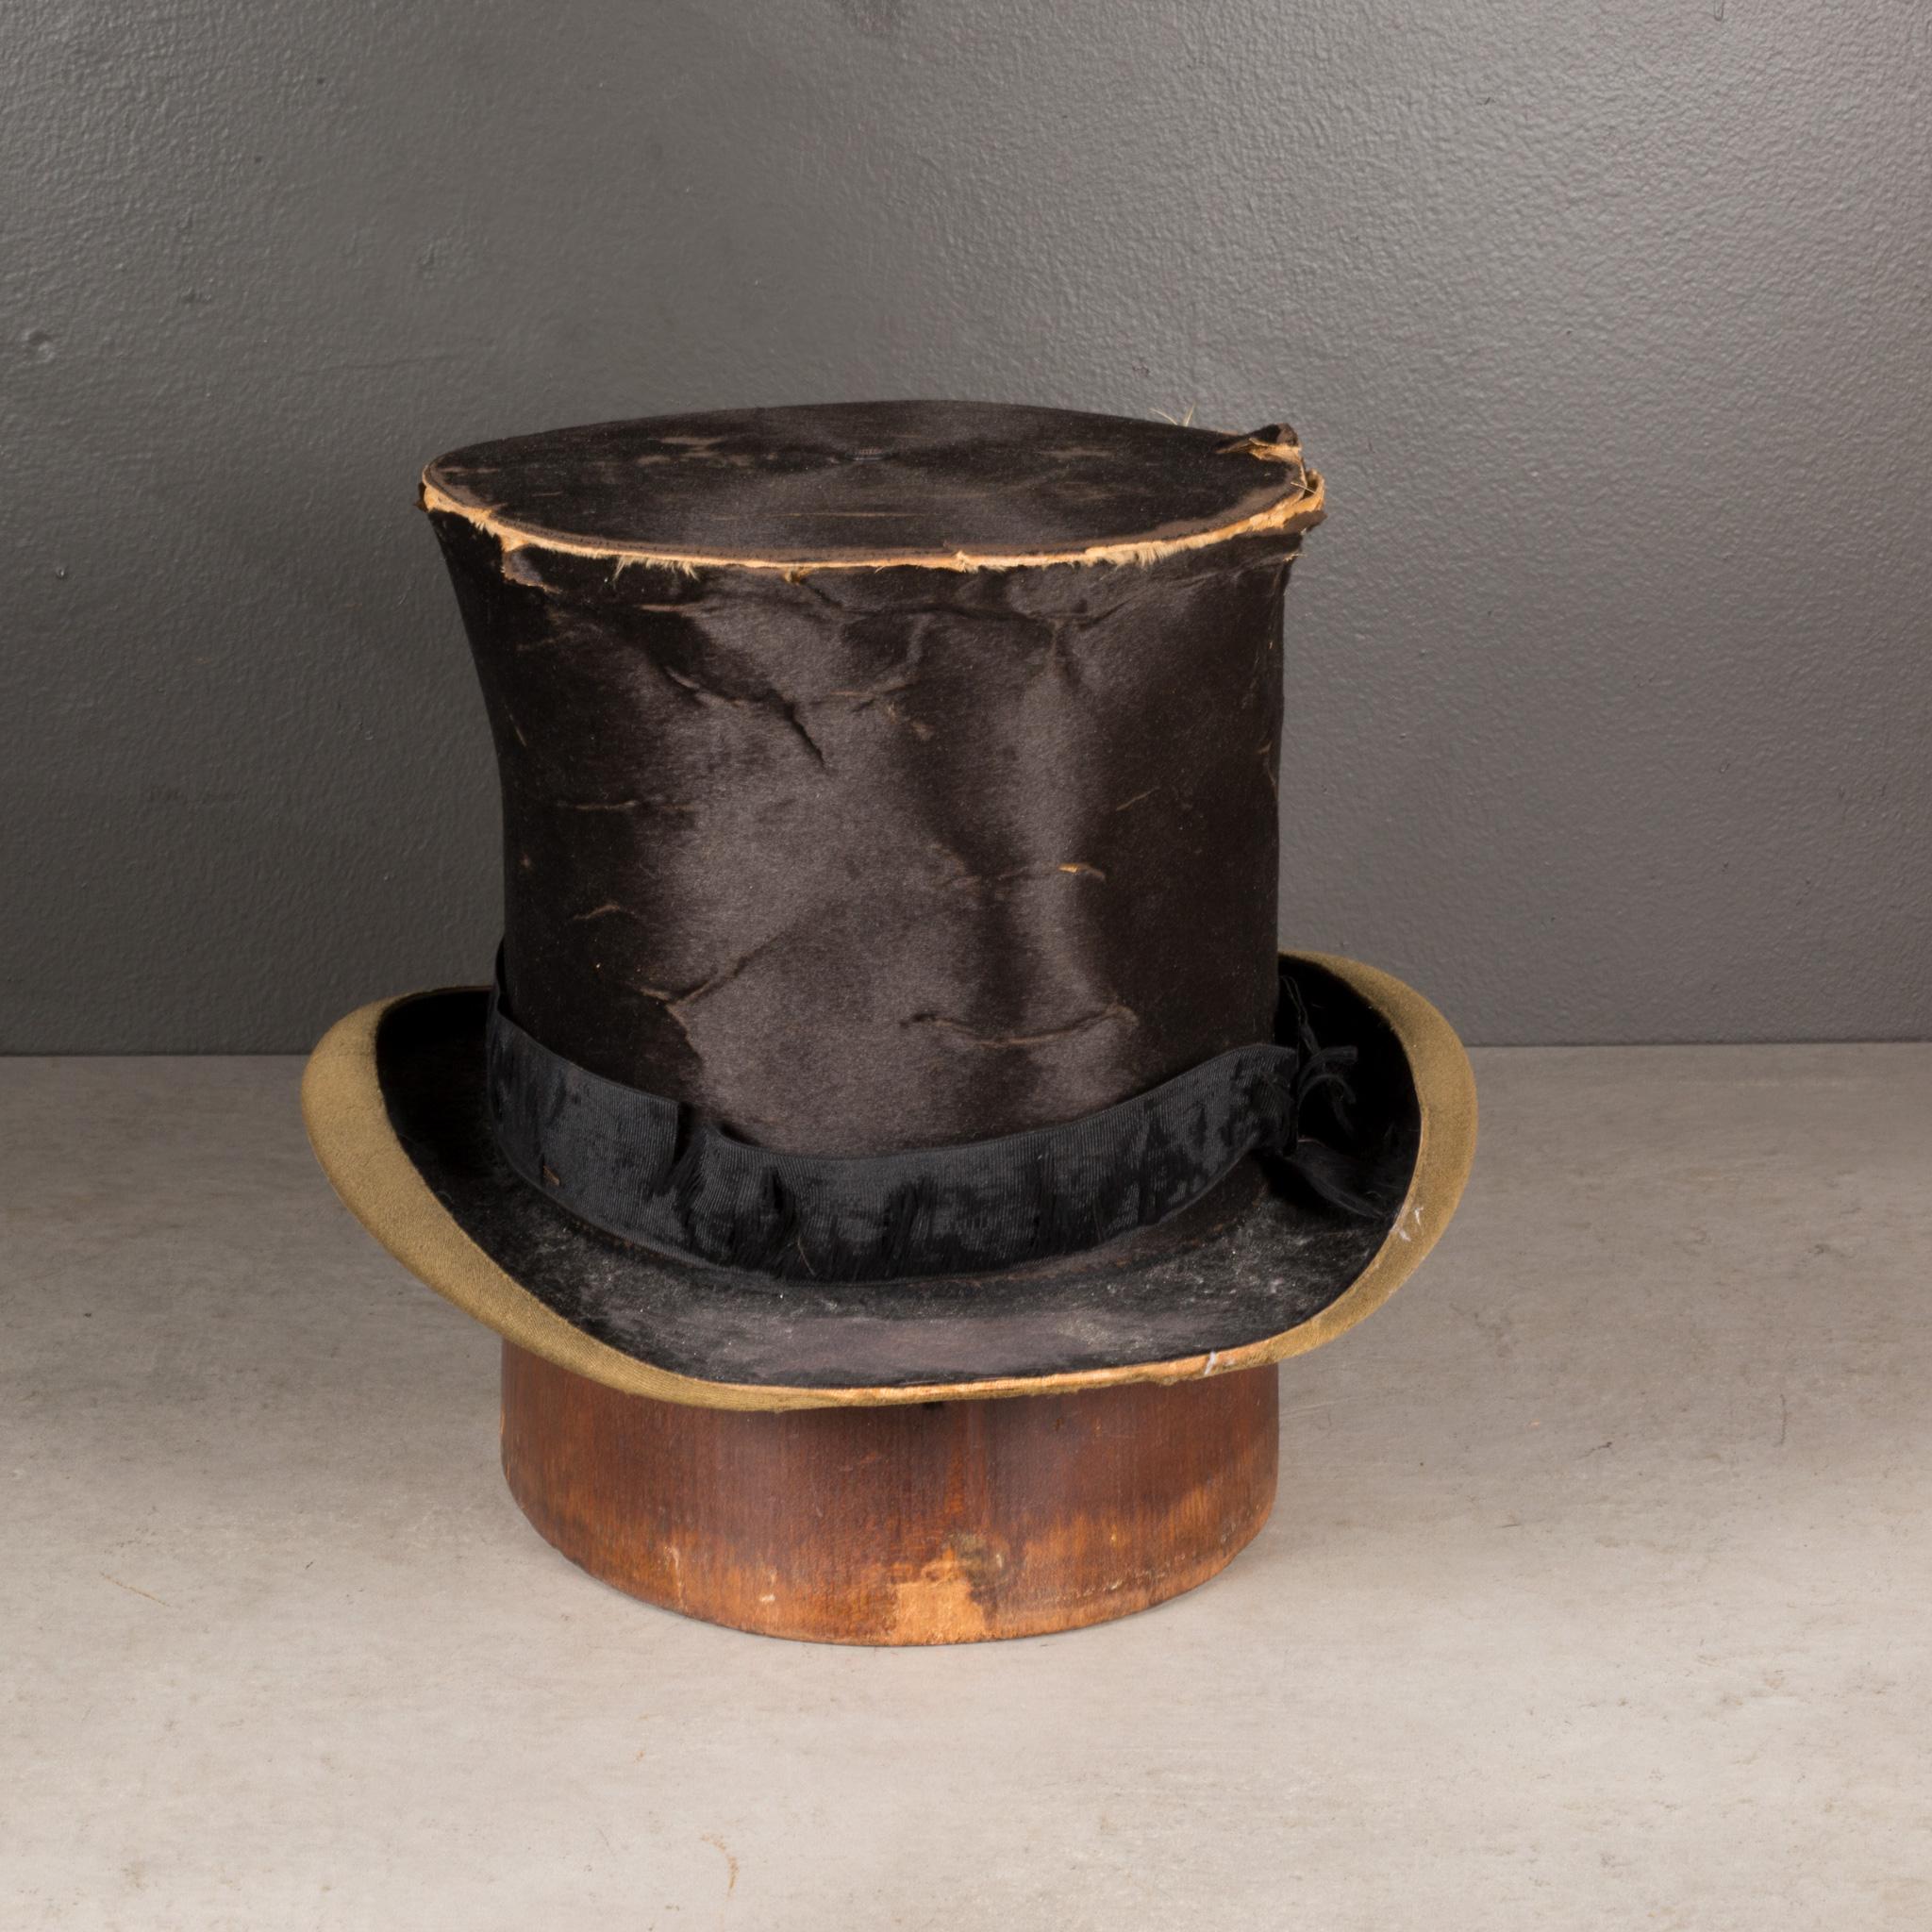 Late Victorian Antique Distressed Silk Top Hat c.1880-1920